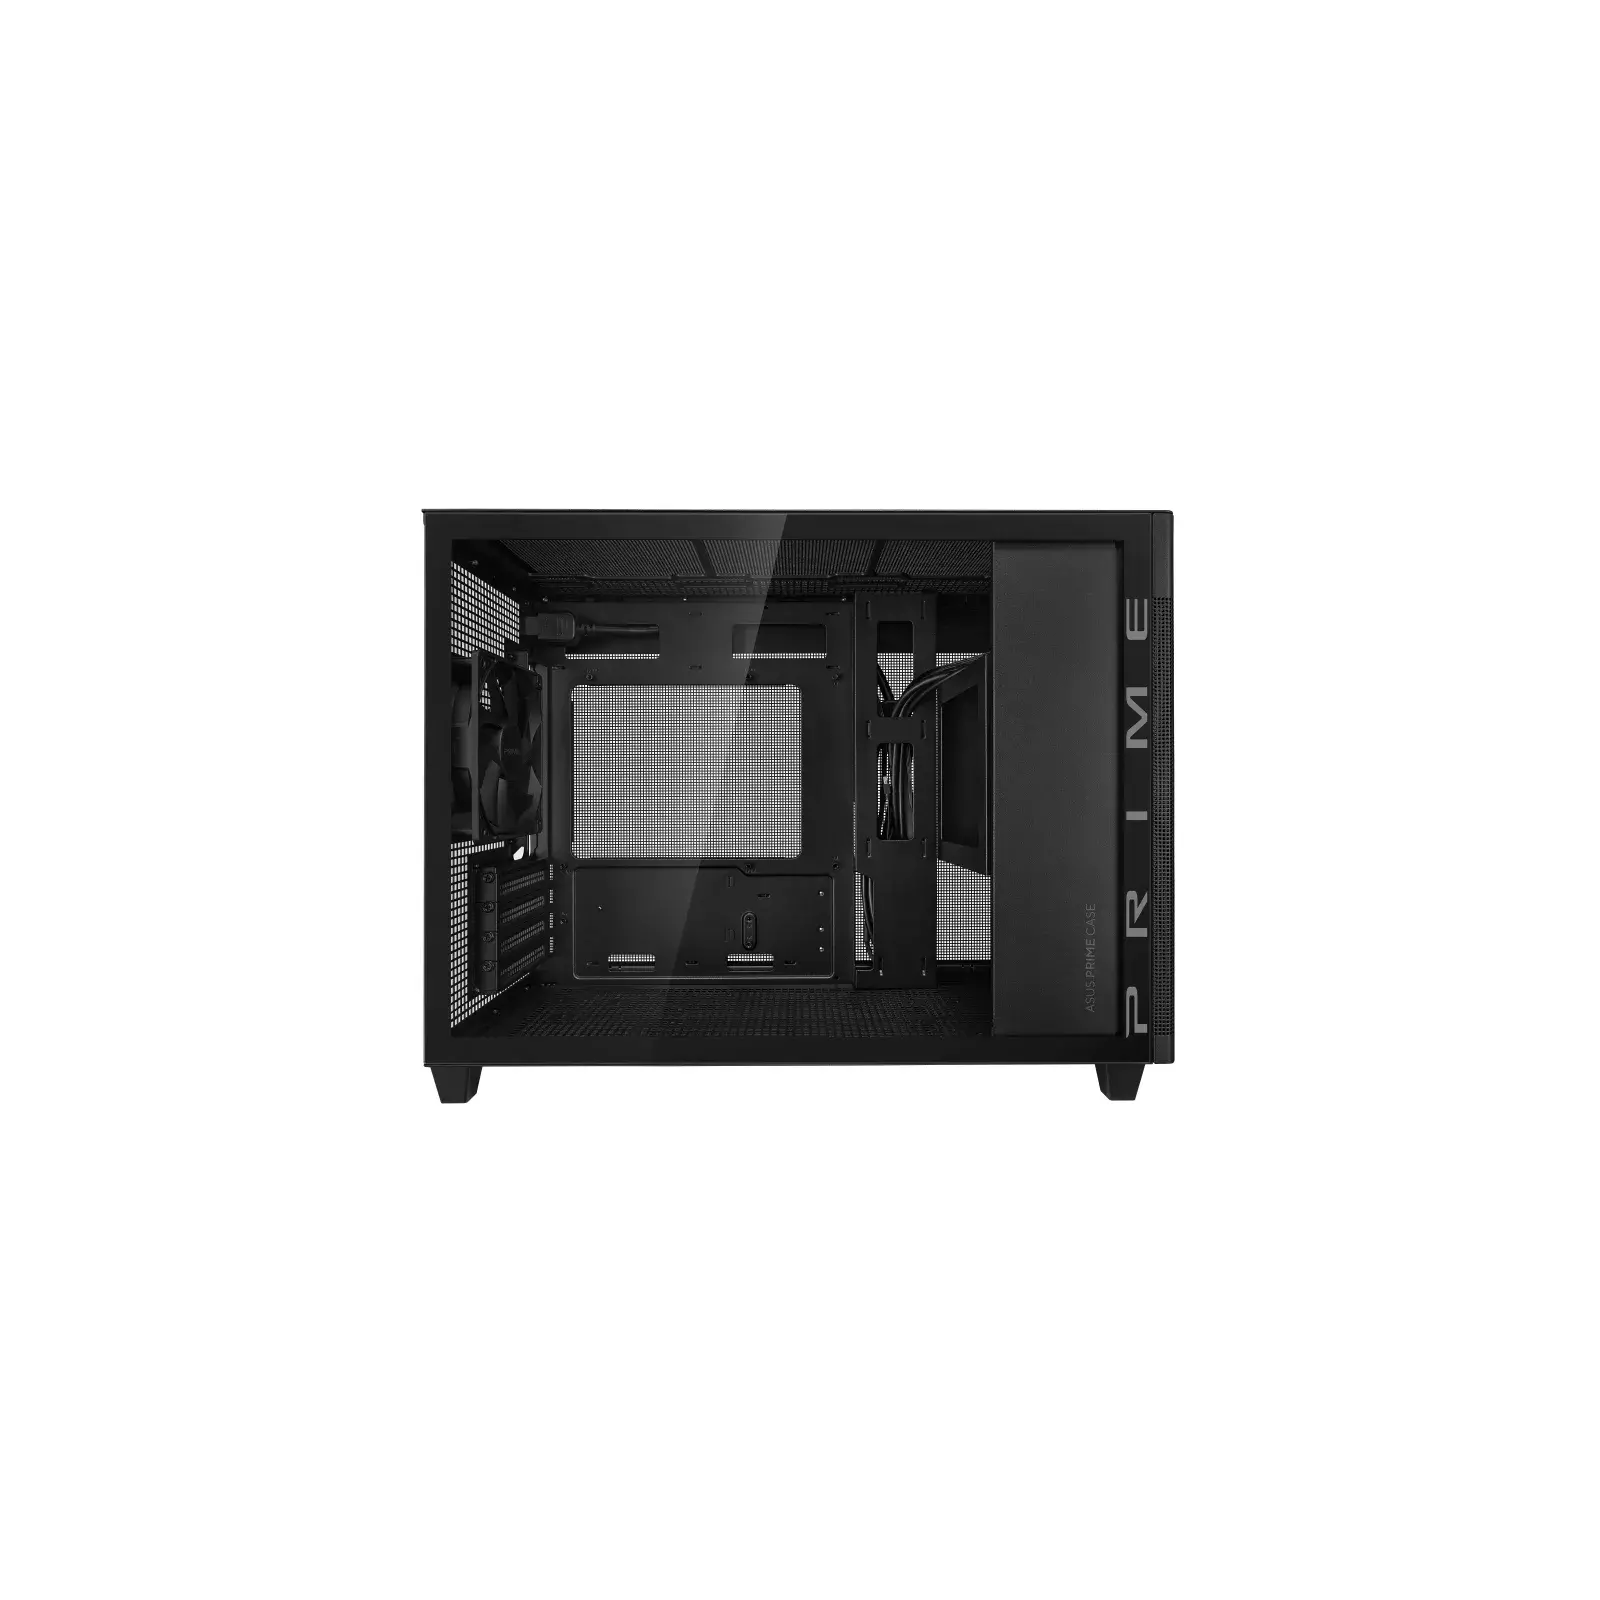  ASUS Prime AP201 Black MicroATX Supports 338mm Graphics Cards,  360mm Coolers, Standard ATX PSUs, Tool-Free Side Panels, Tempered Glass  Front Panel, USB Type-C : Electronics